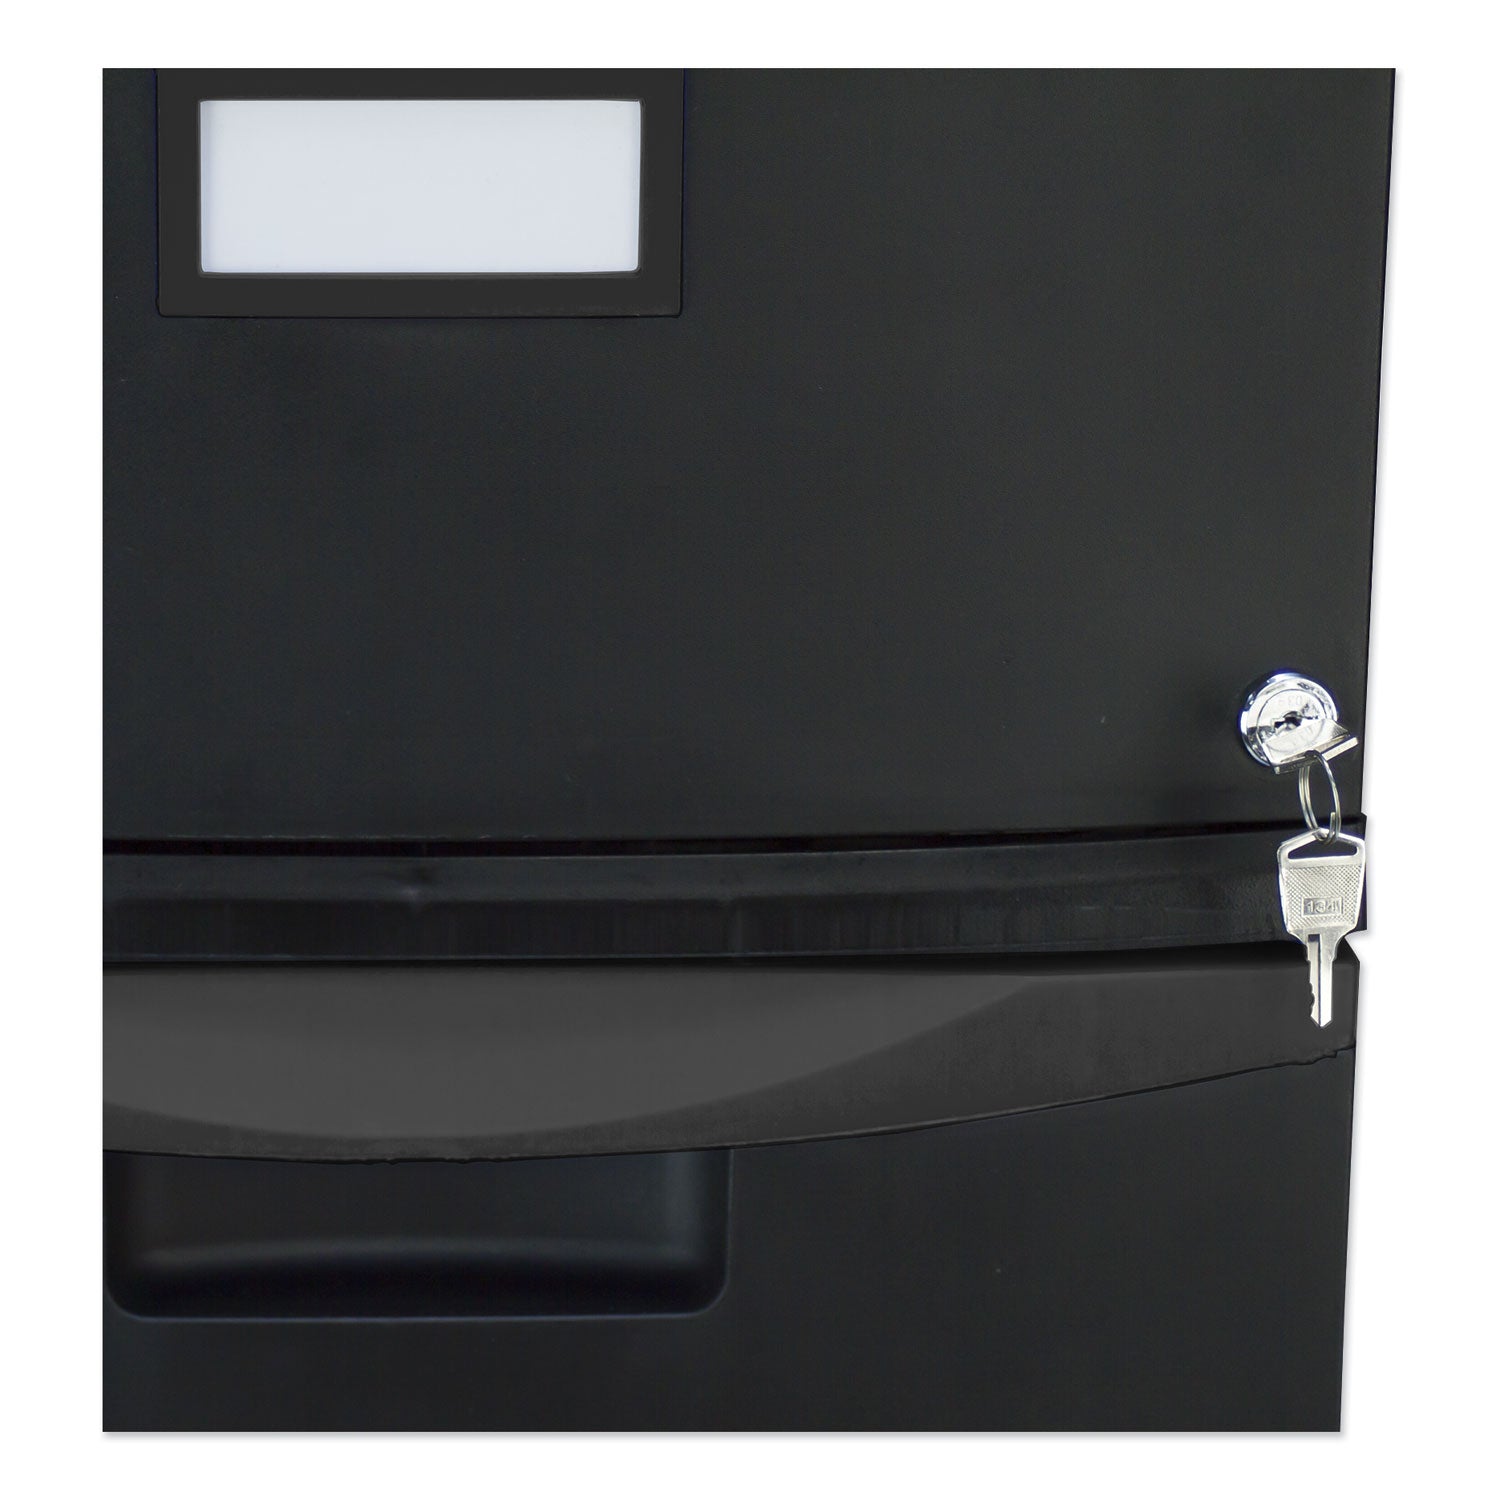 two-drawer-mobile-filing-cabinet-2-legal-letter-size-file-drawers-black-1475-x-1825-x-26_stx61312b01c - 7